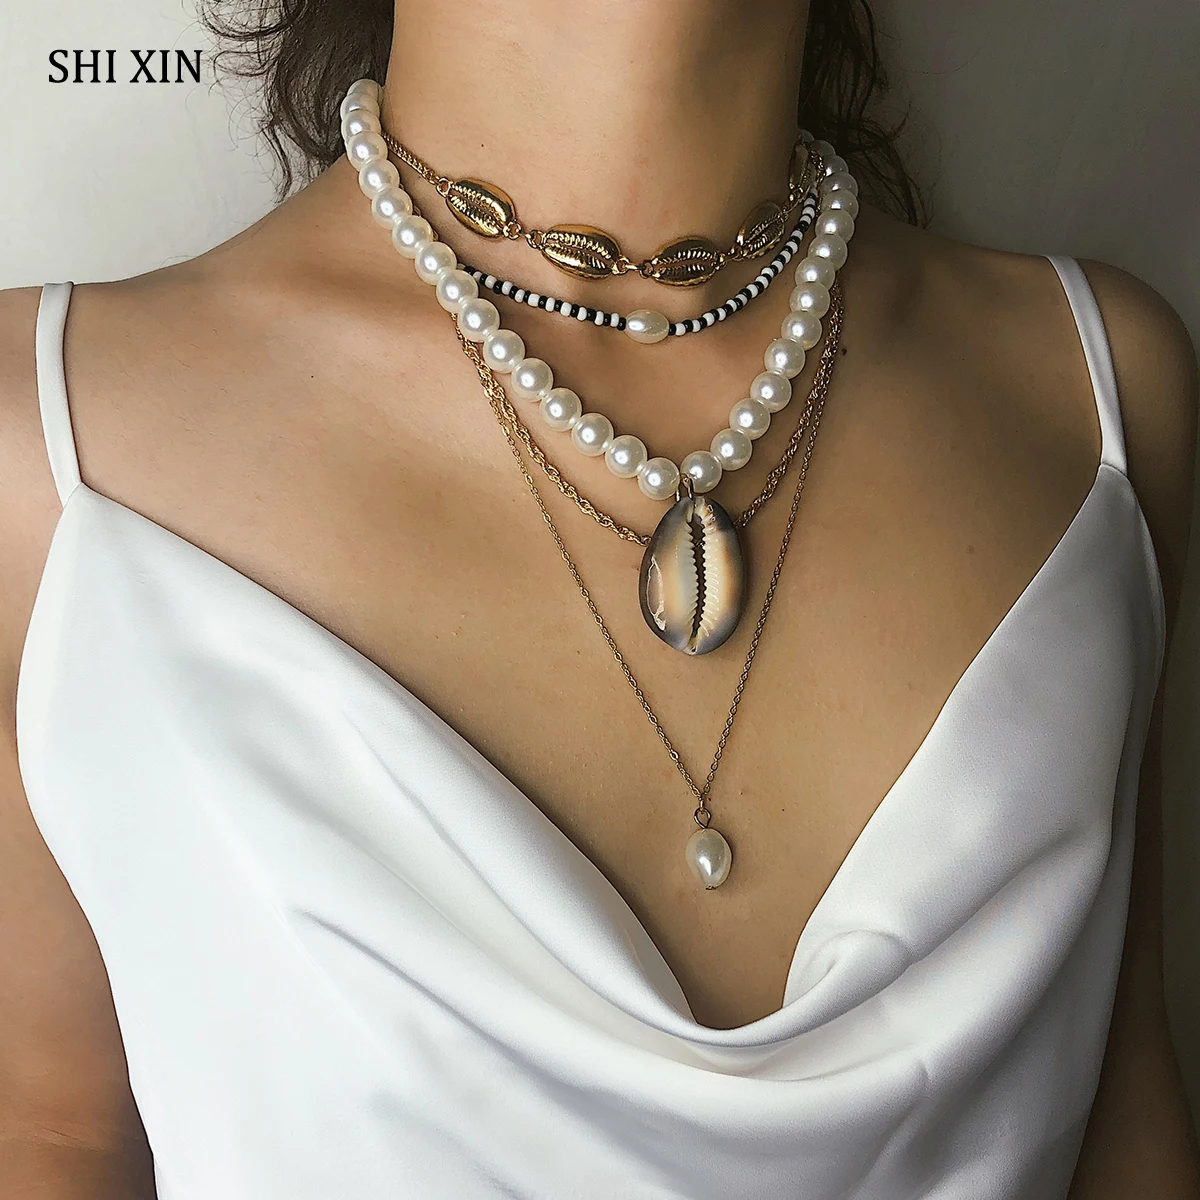 Women Necklace Natural Stone Shell Pendant Jewelry Beads Chain Conch Choker D